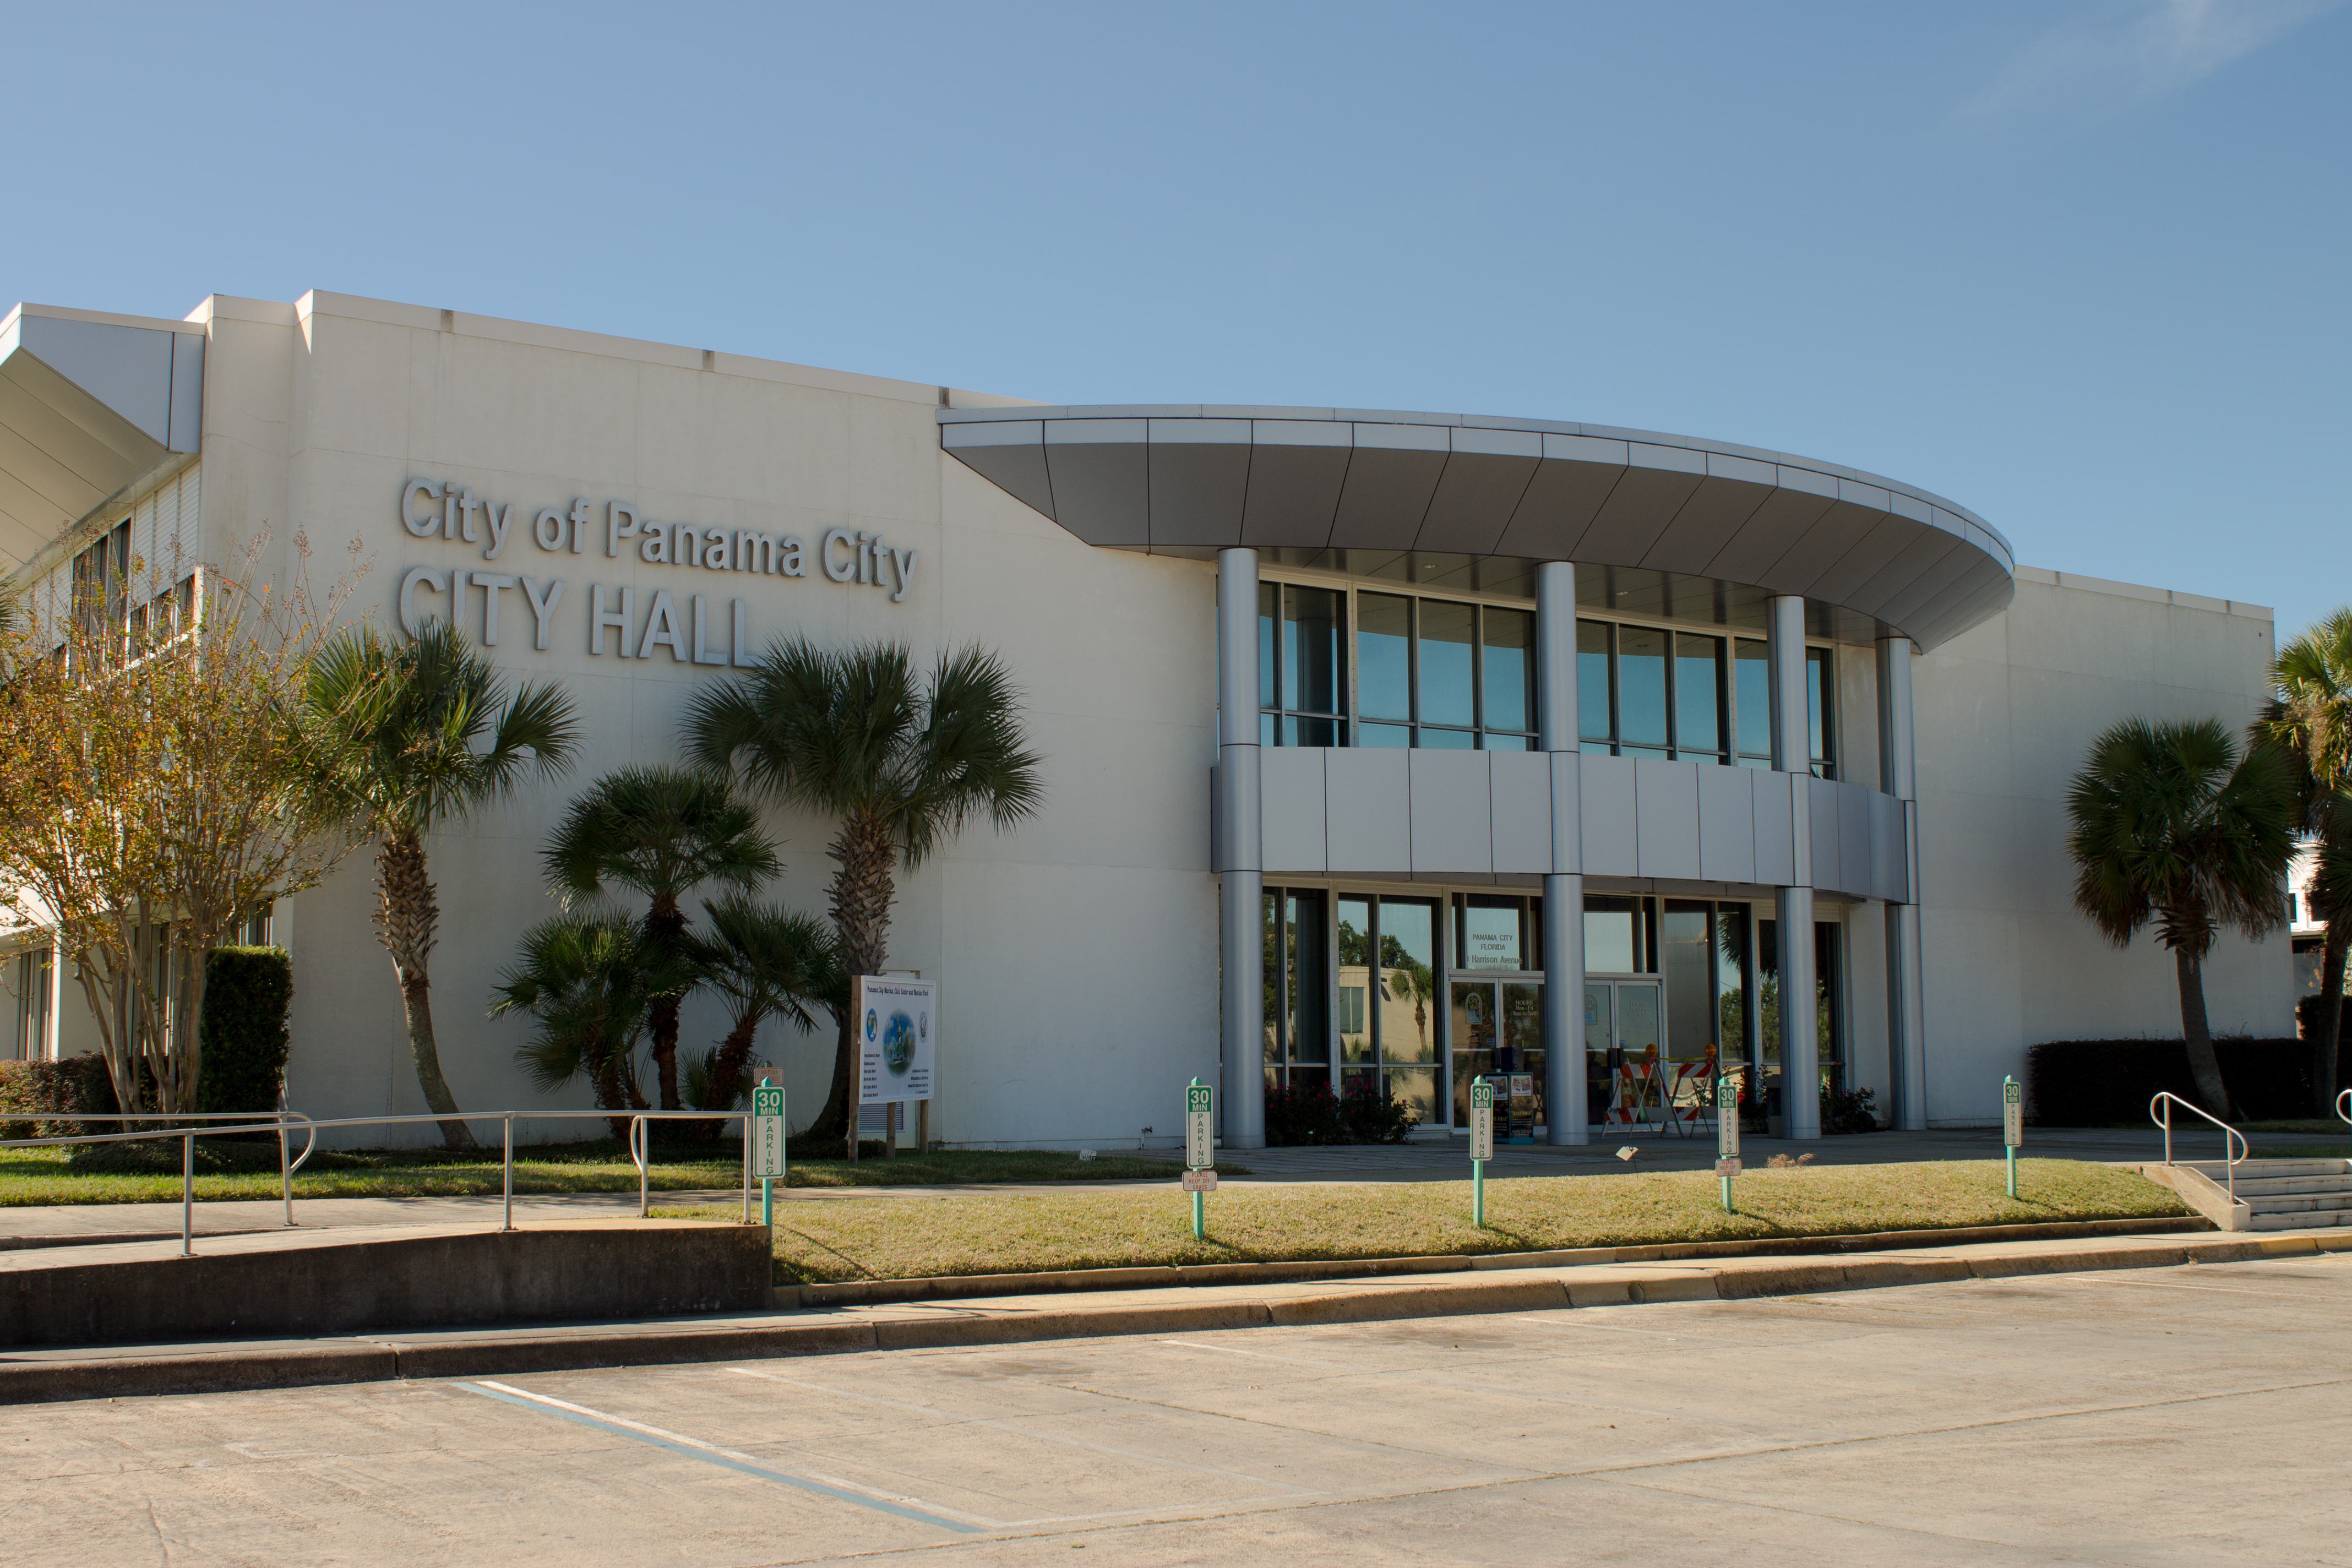 Panama City is a city in and the county seat of Bay County, Florida, United States. Located along U.S. Highway 98 (US 98), it is the largest city between Tallahassee and Pensacola. It is also the most populated city of the Panama City–Lynn Haven, Florida metropolitan statistical area. Panama City was severely damaged when Hurricane Michael made landfall as a Category 5 hurricane on October 10, 2018. As of the 2020 census, the population was 32,939, down from the figure of 36,484 at the 2010 census.

